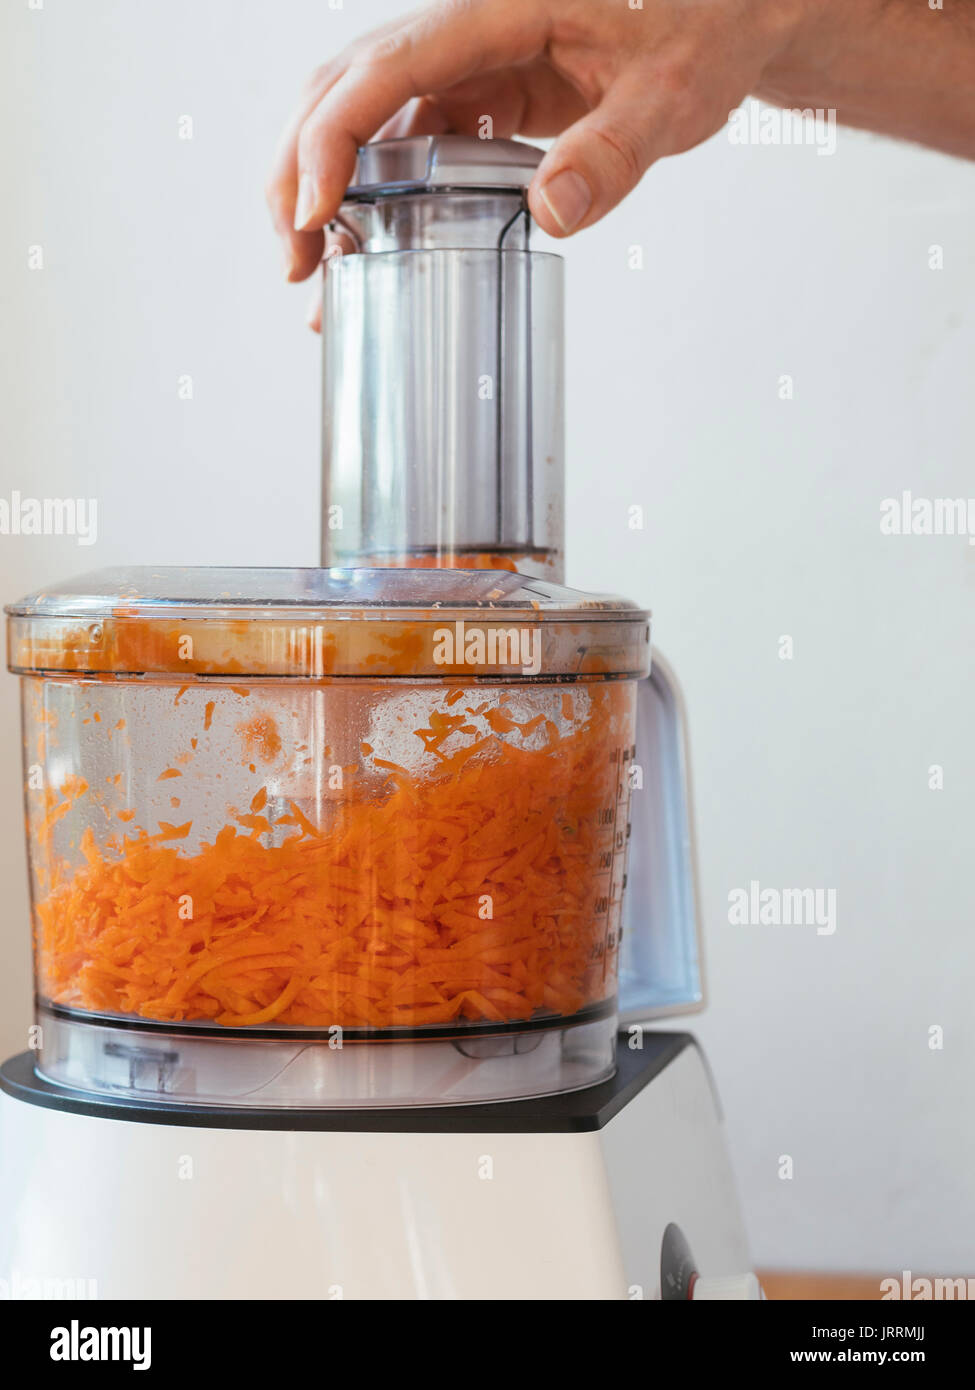 Man grating a carrot in a food processor Stock Photo